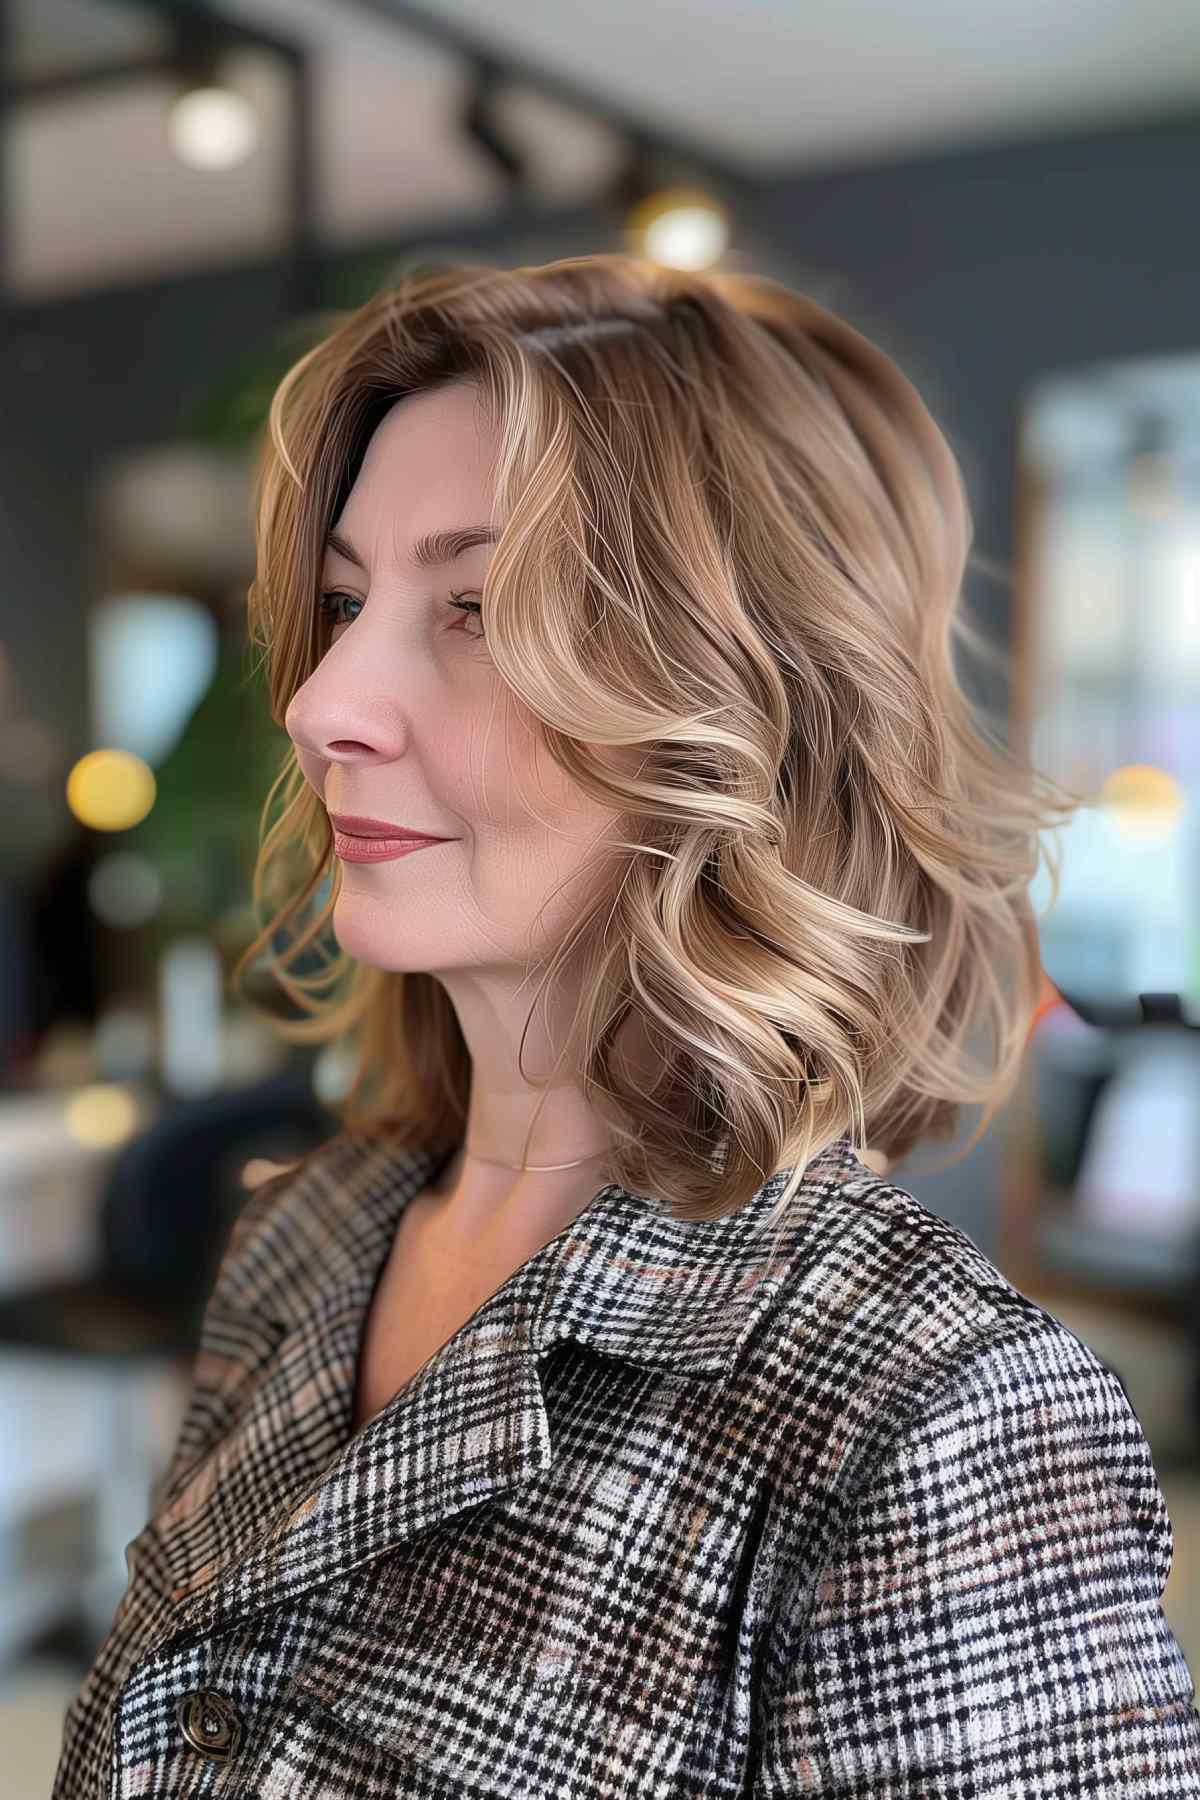 Warm caramel-highlighted round layered haircut on a woman over 50, styled into soft curls that frame the face for a vibrant and youthful look.